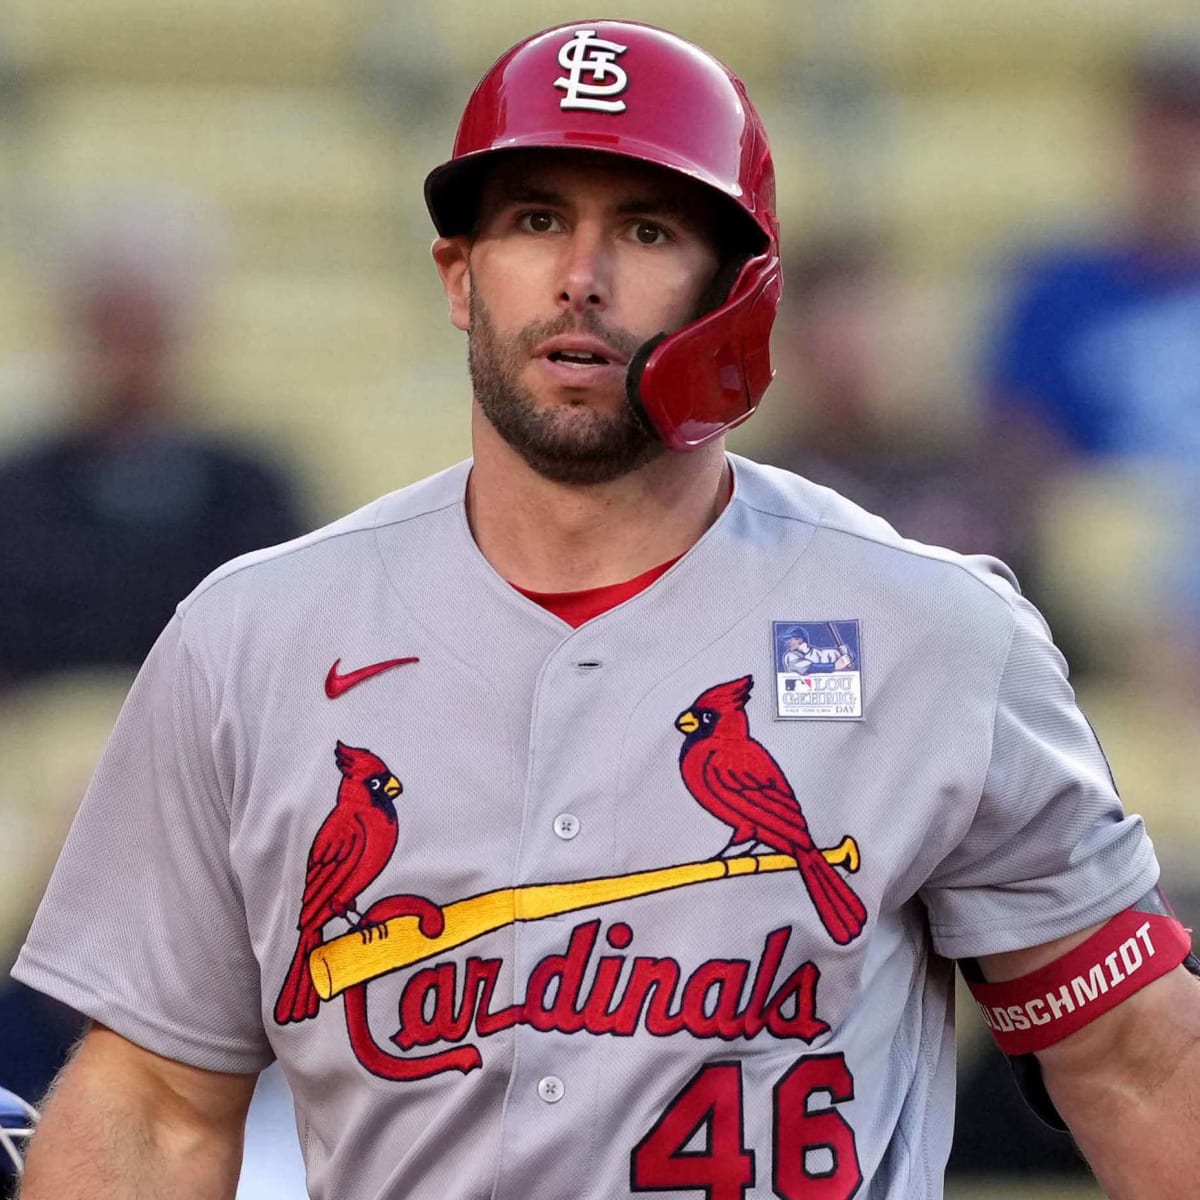 Gorman hits 2 HRs as Cards win 6-2 to regain share of 1st